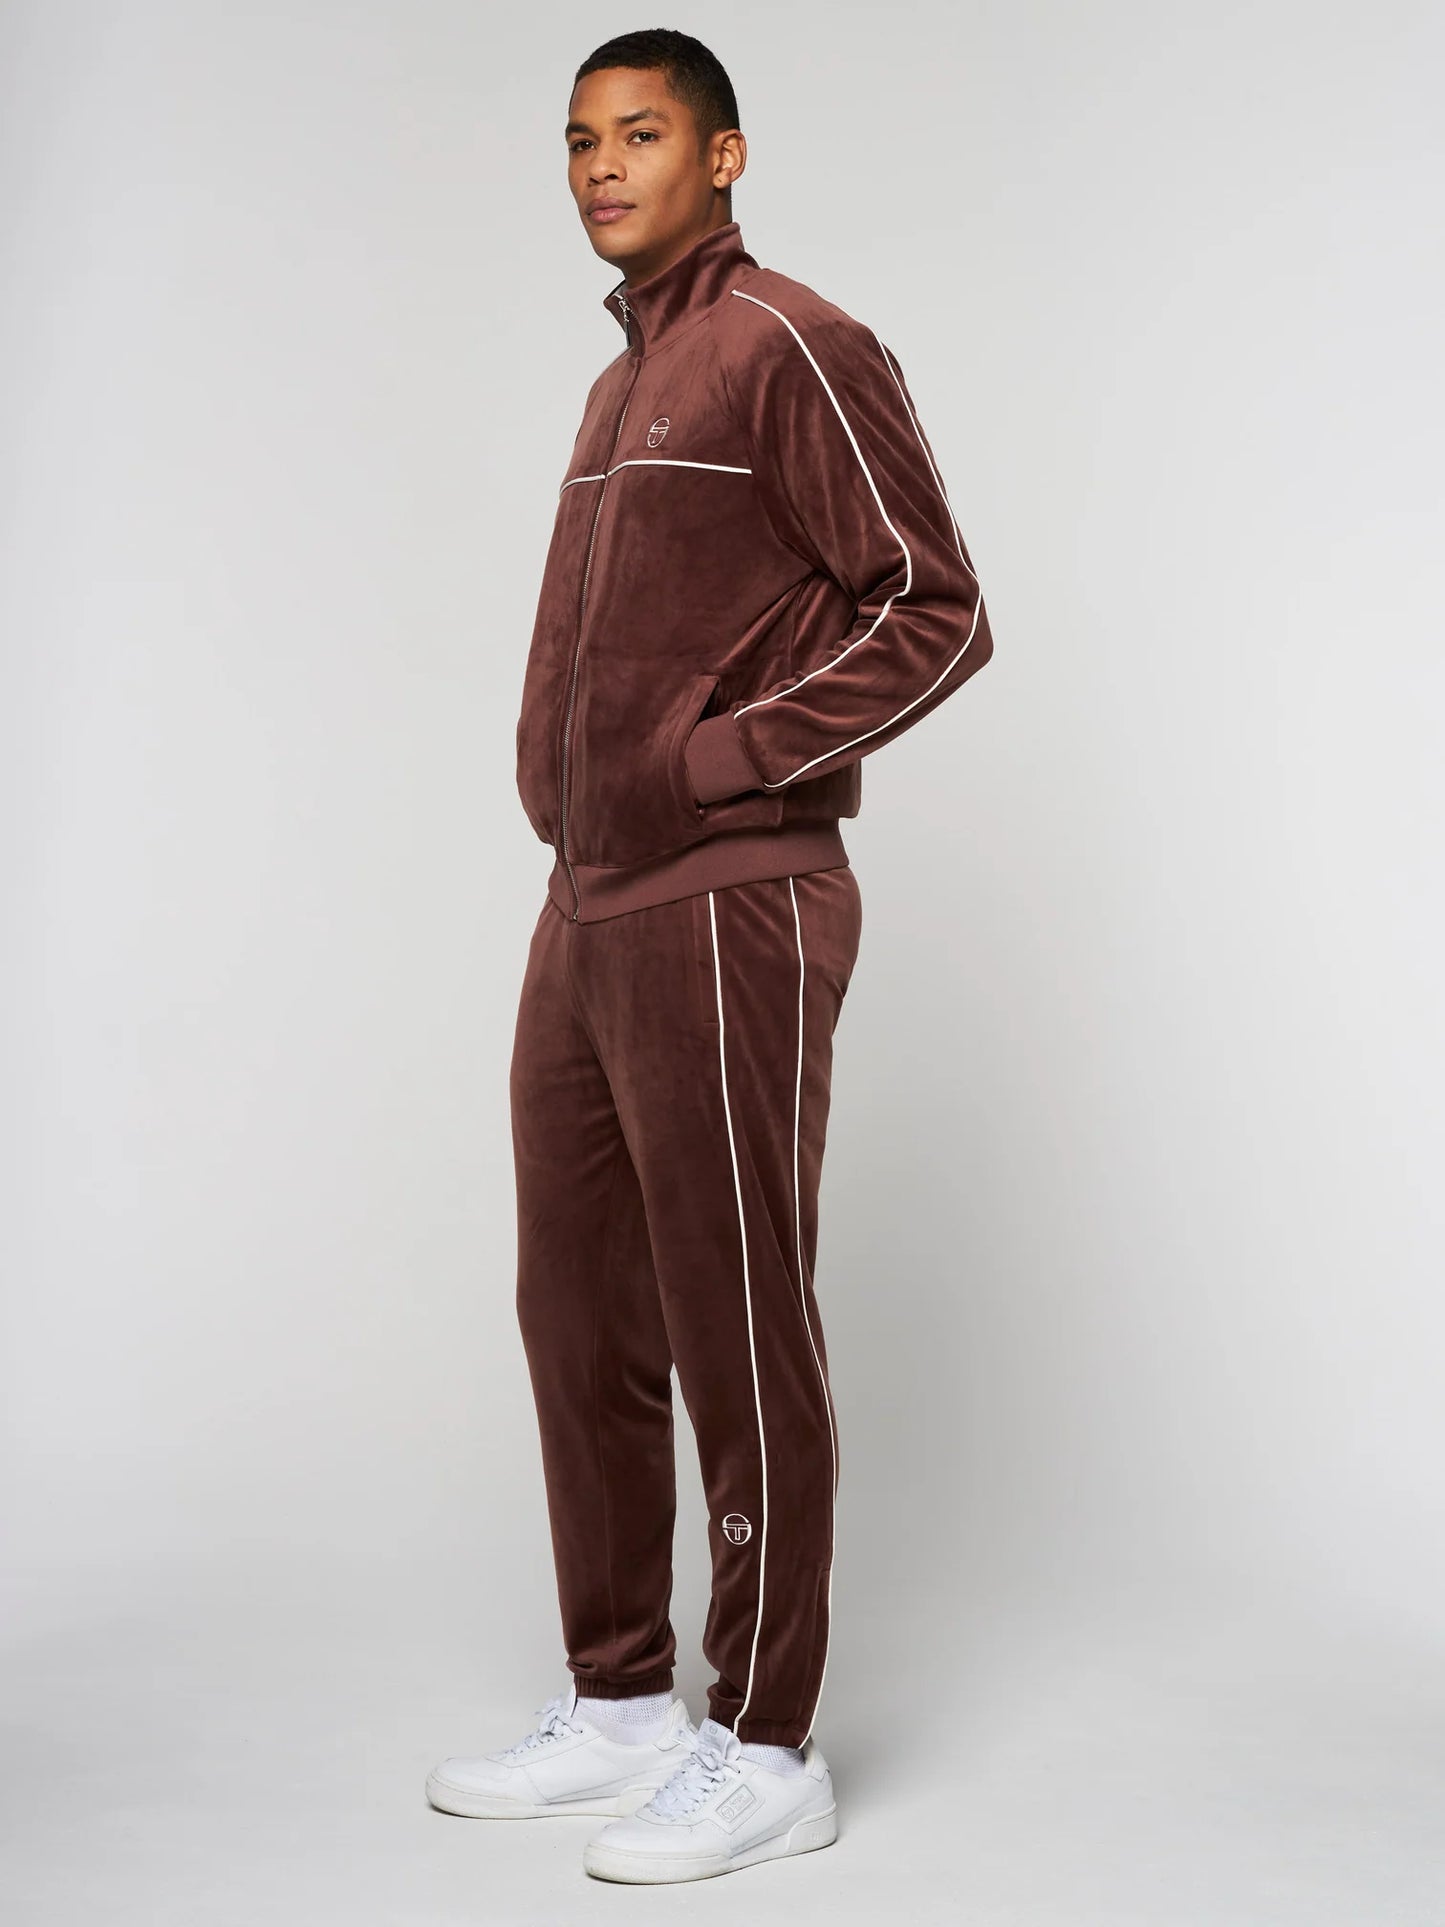 LIONI VELOUR (Only sold as a set) - DEEP MAHOGANY